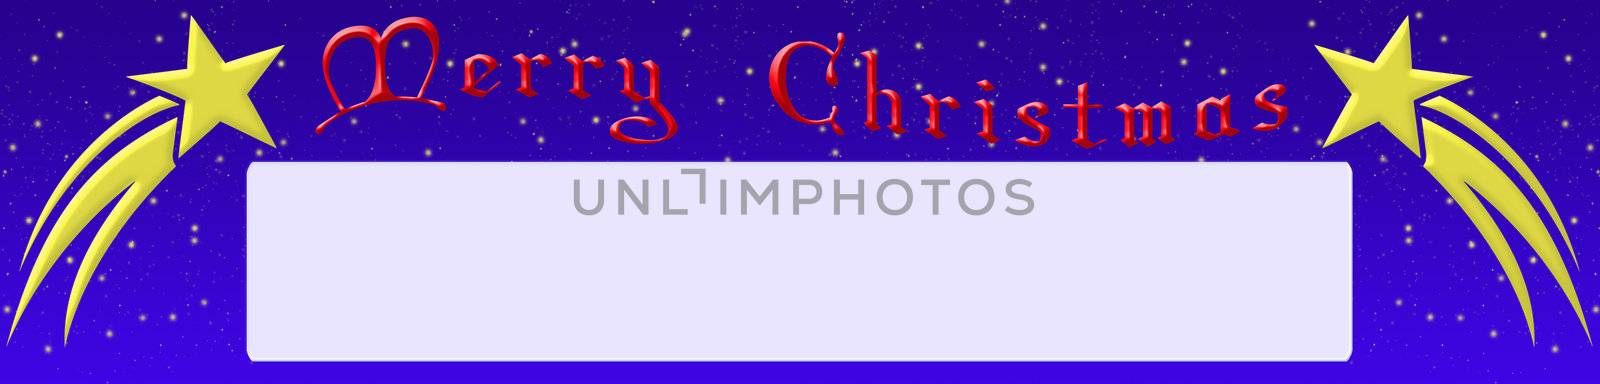 Illustration of Christmas for web banners or graphics
